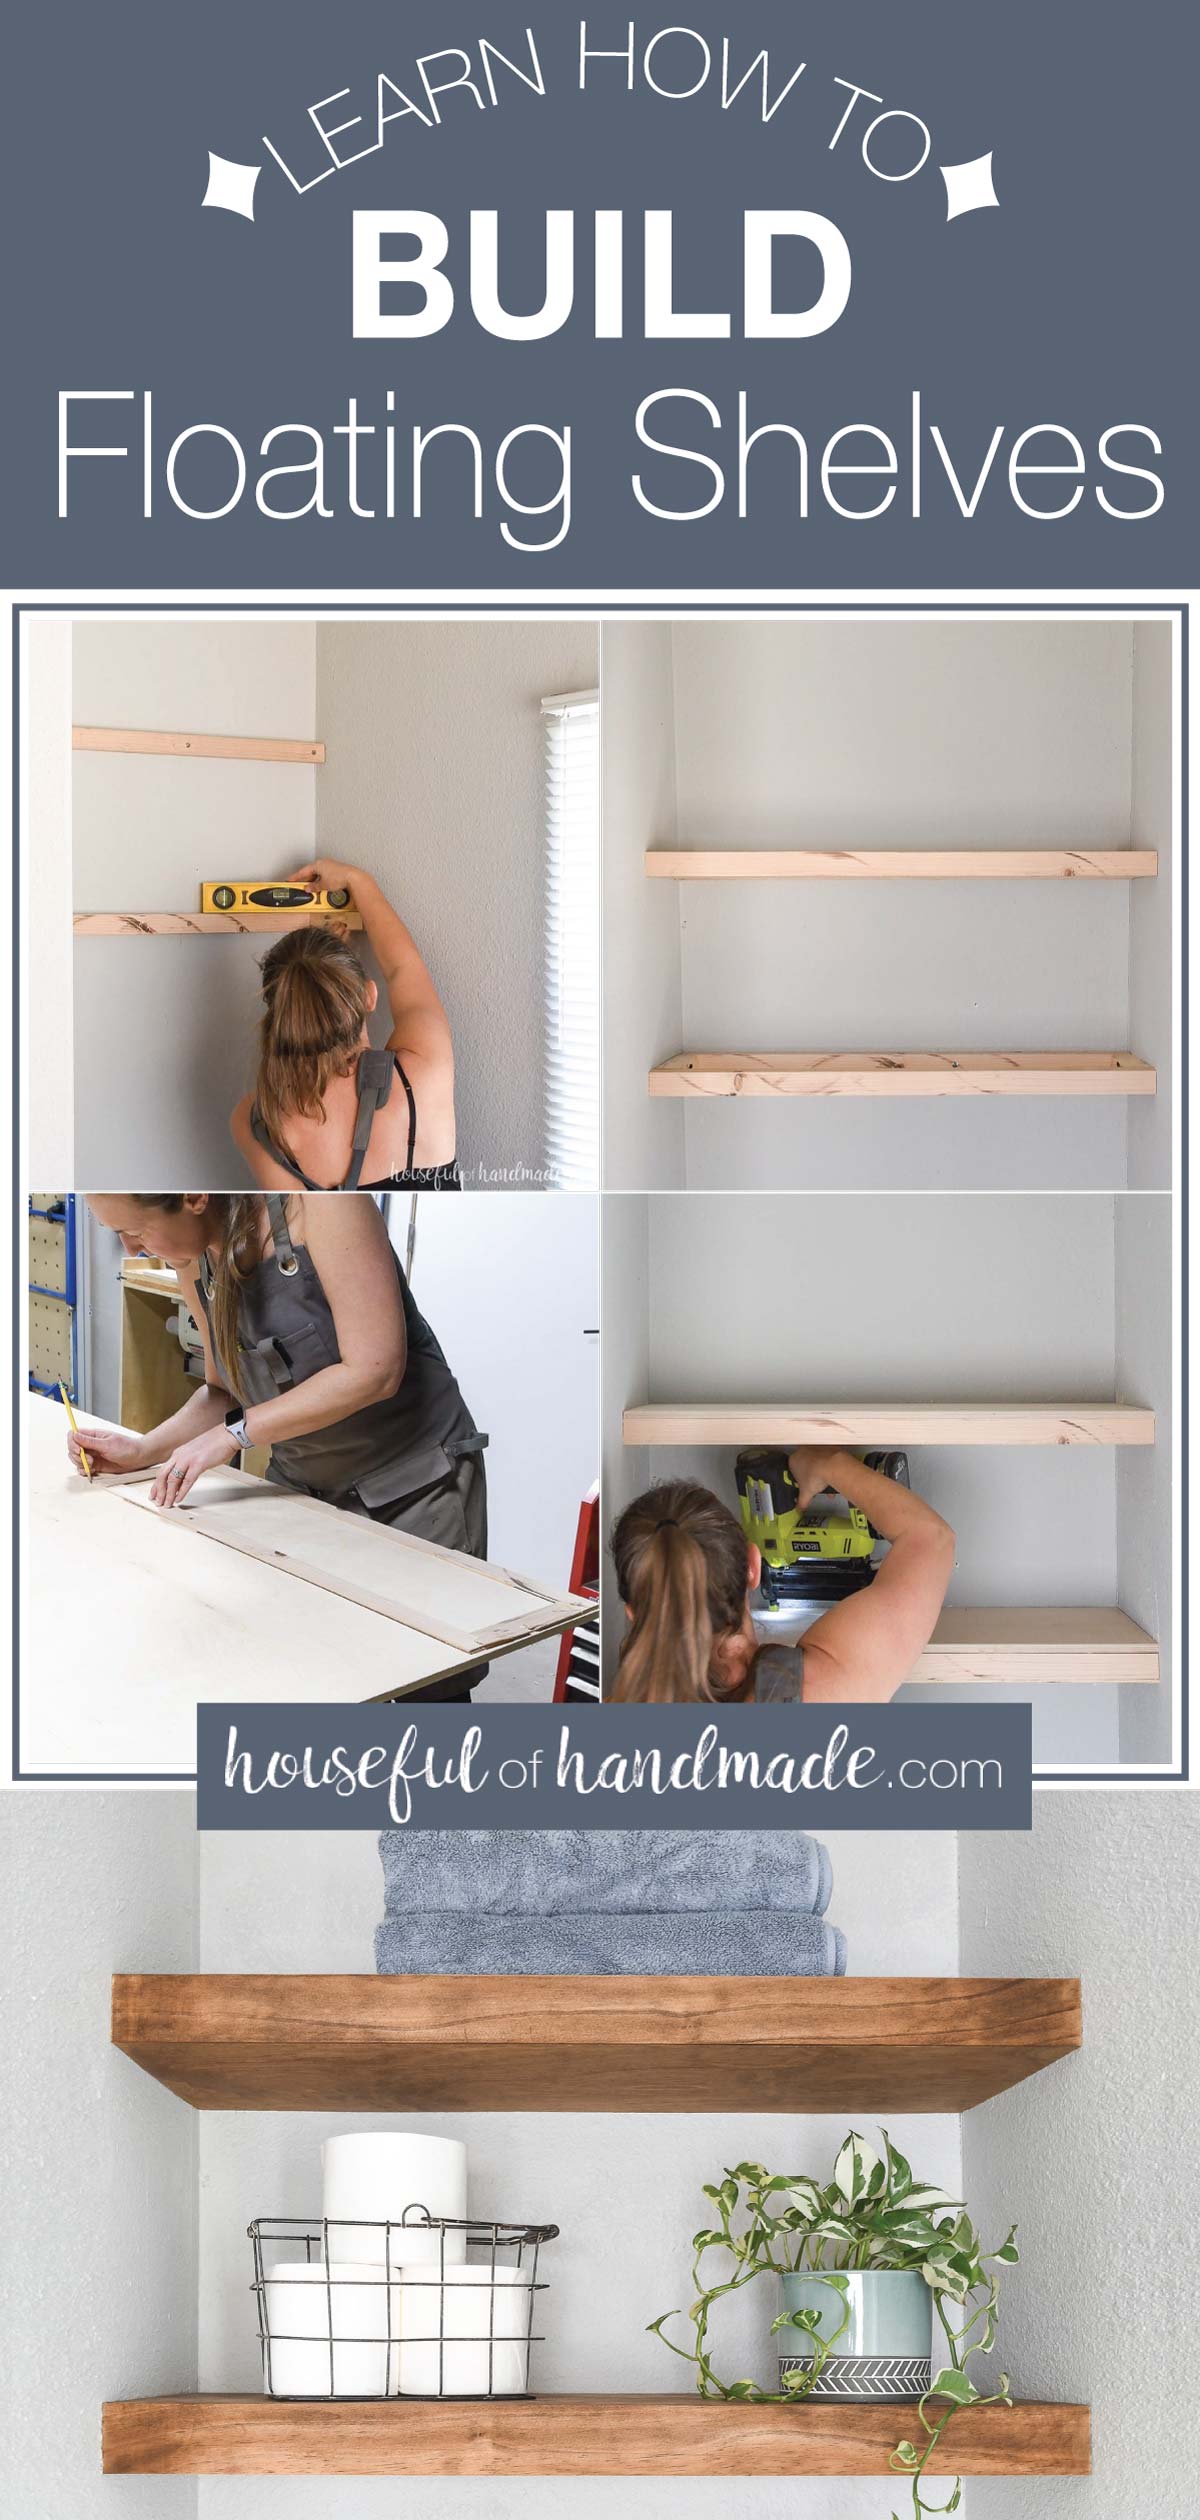 Easy Diy Floating Shelves In A Nook Or Alcove Houseful Of Handmade 5878